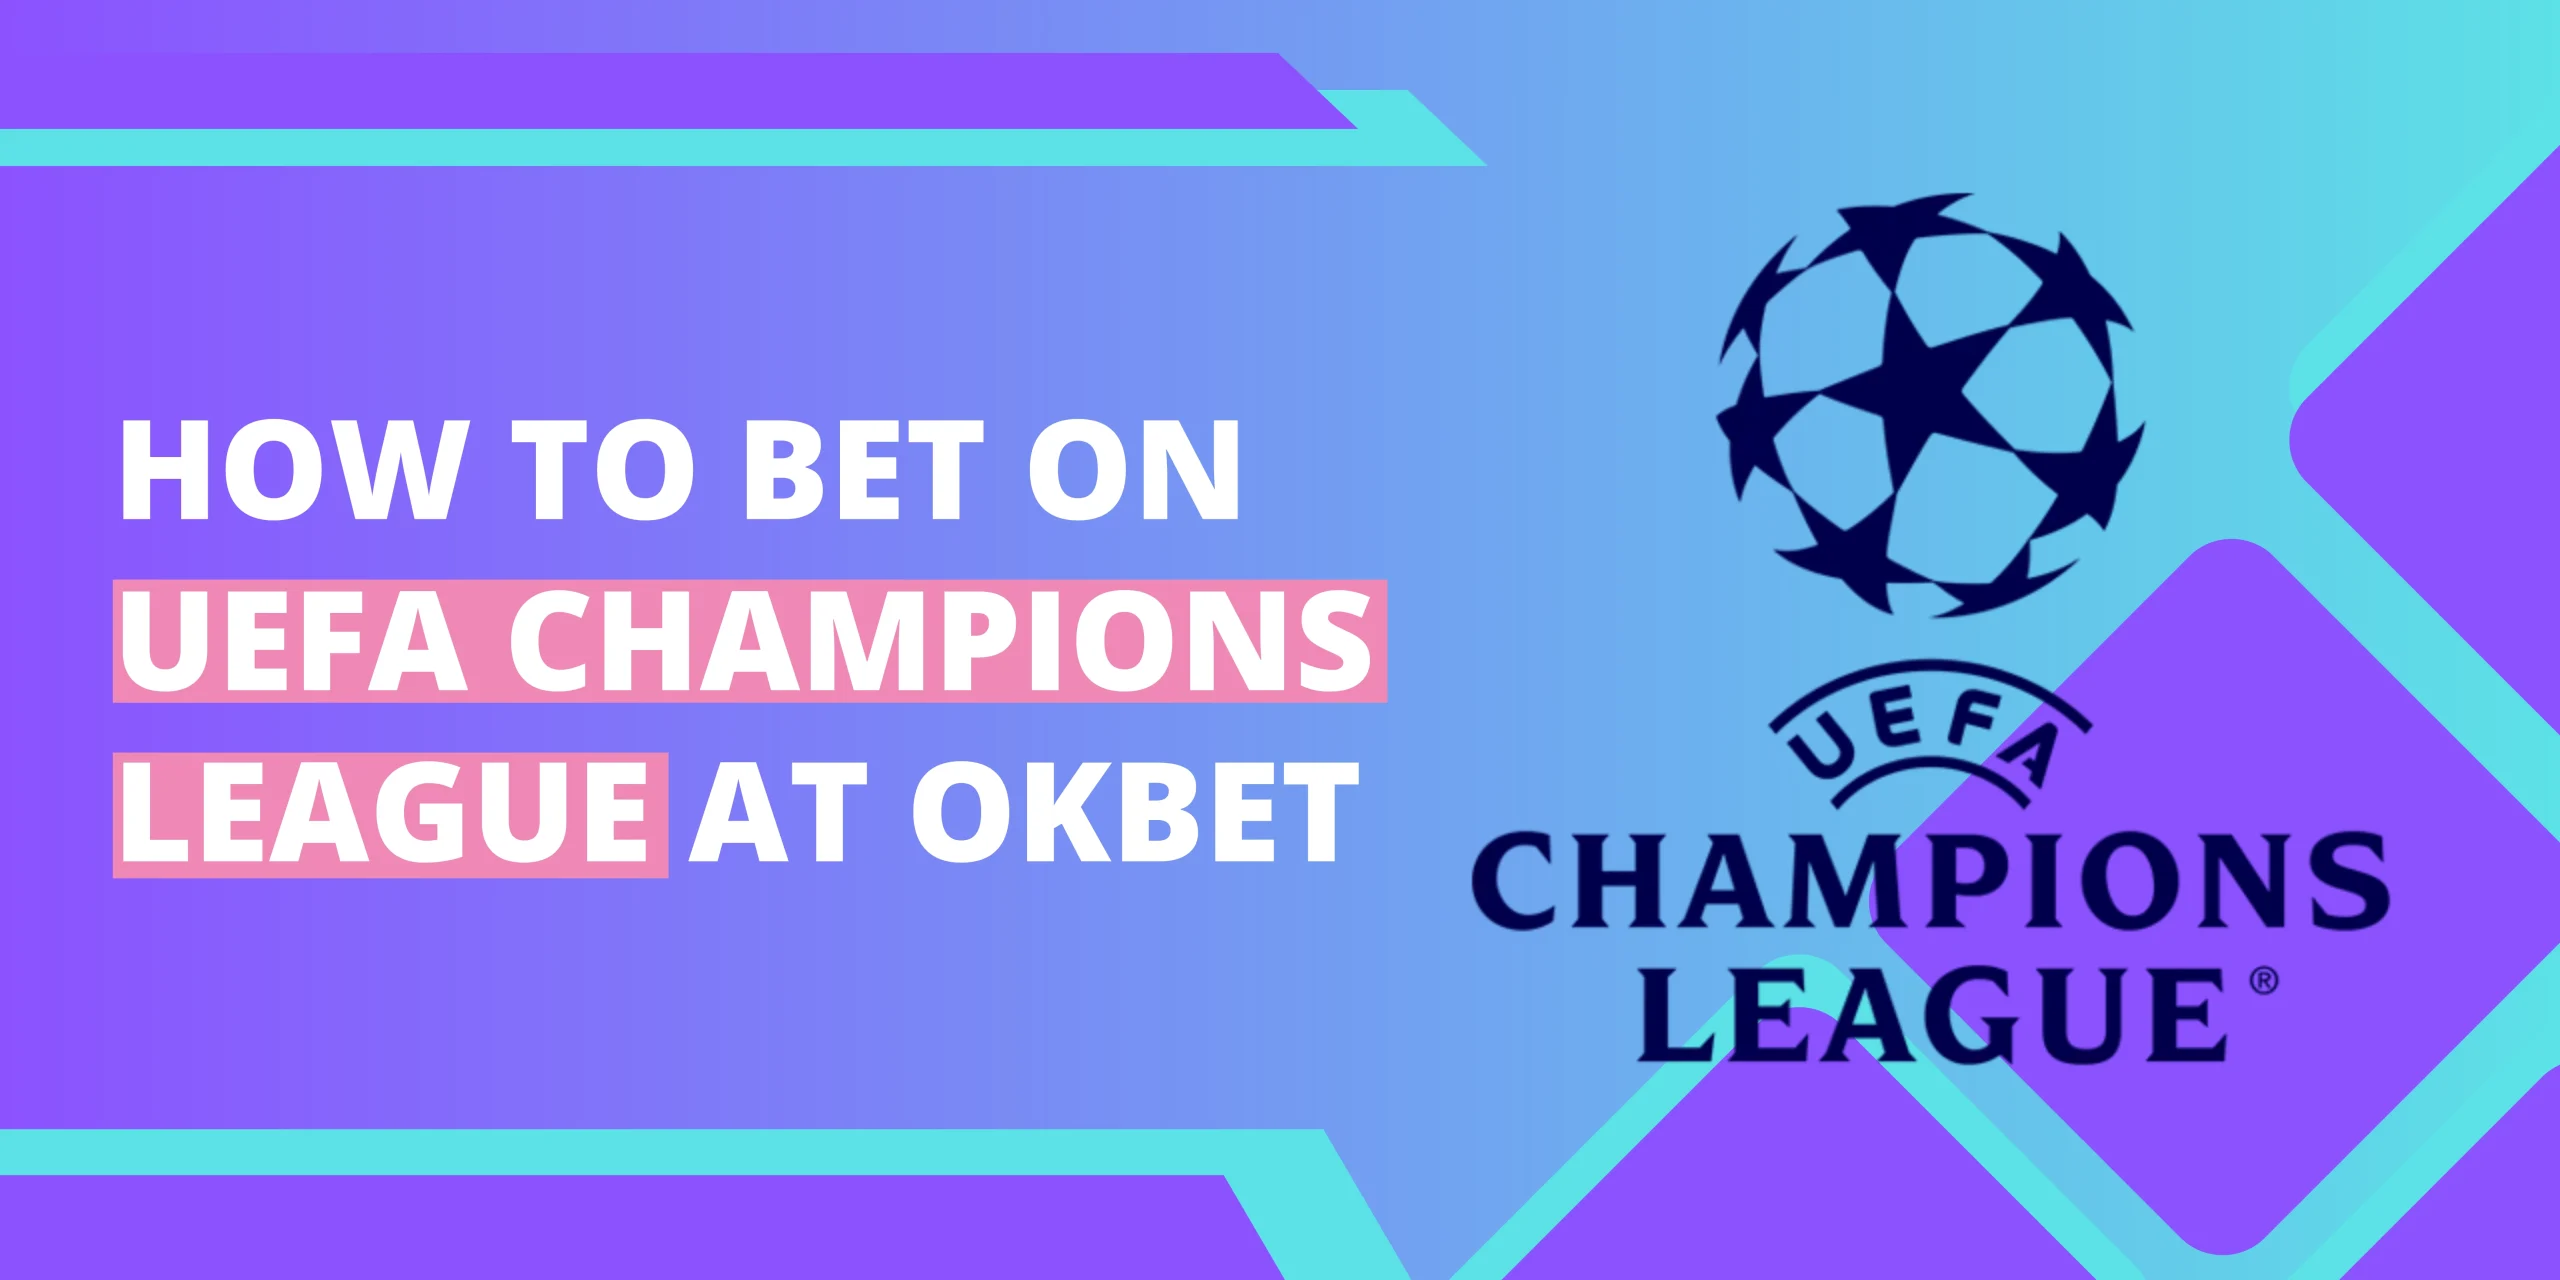 How to Bet on UEFA Champions League at OKBet